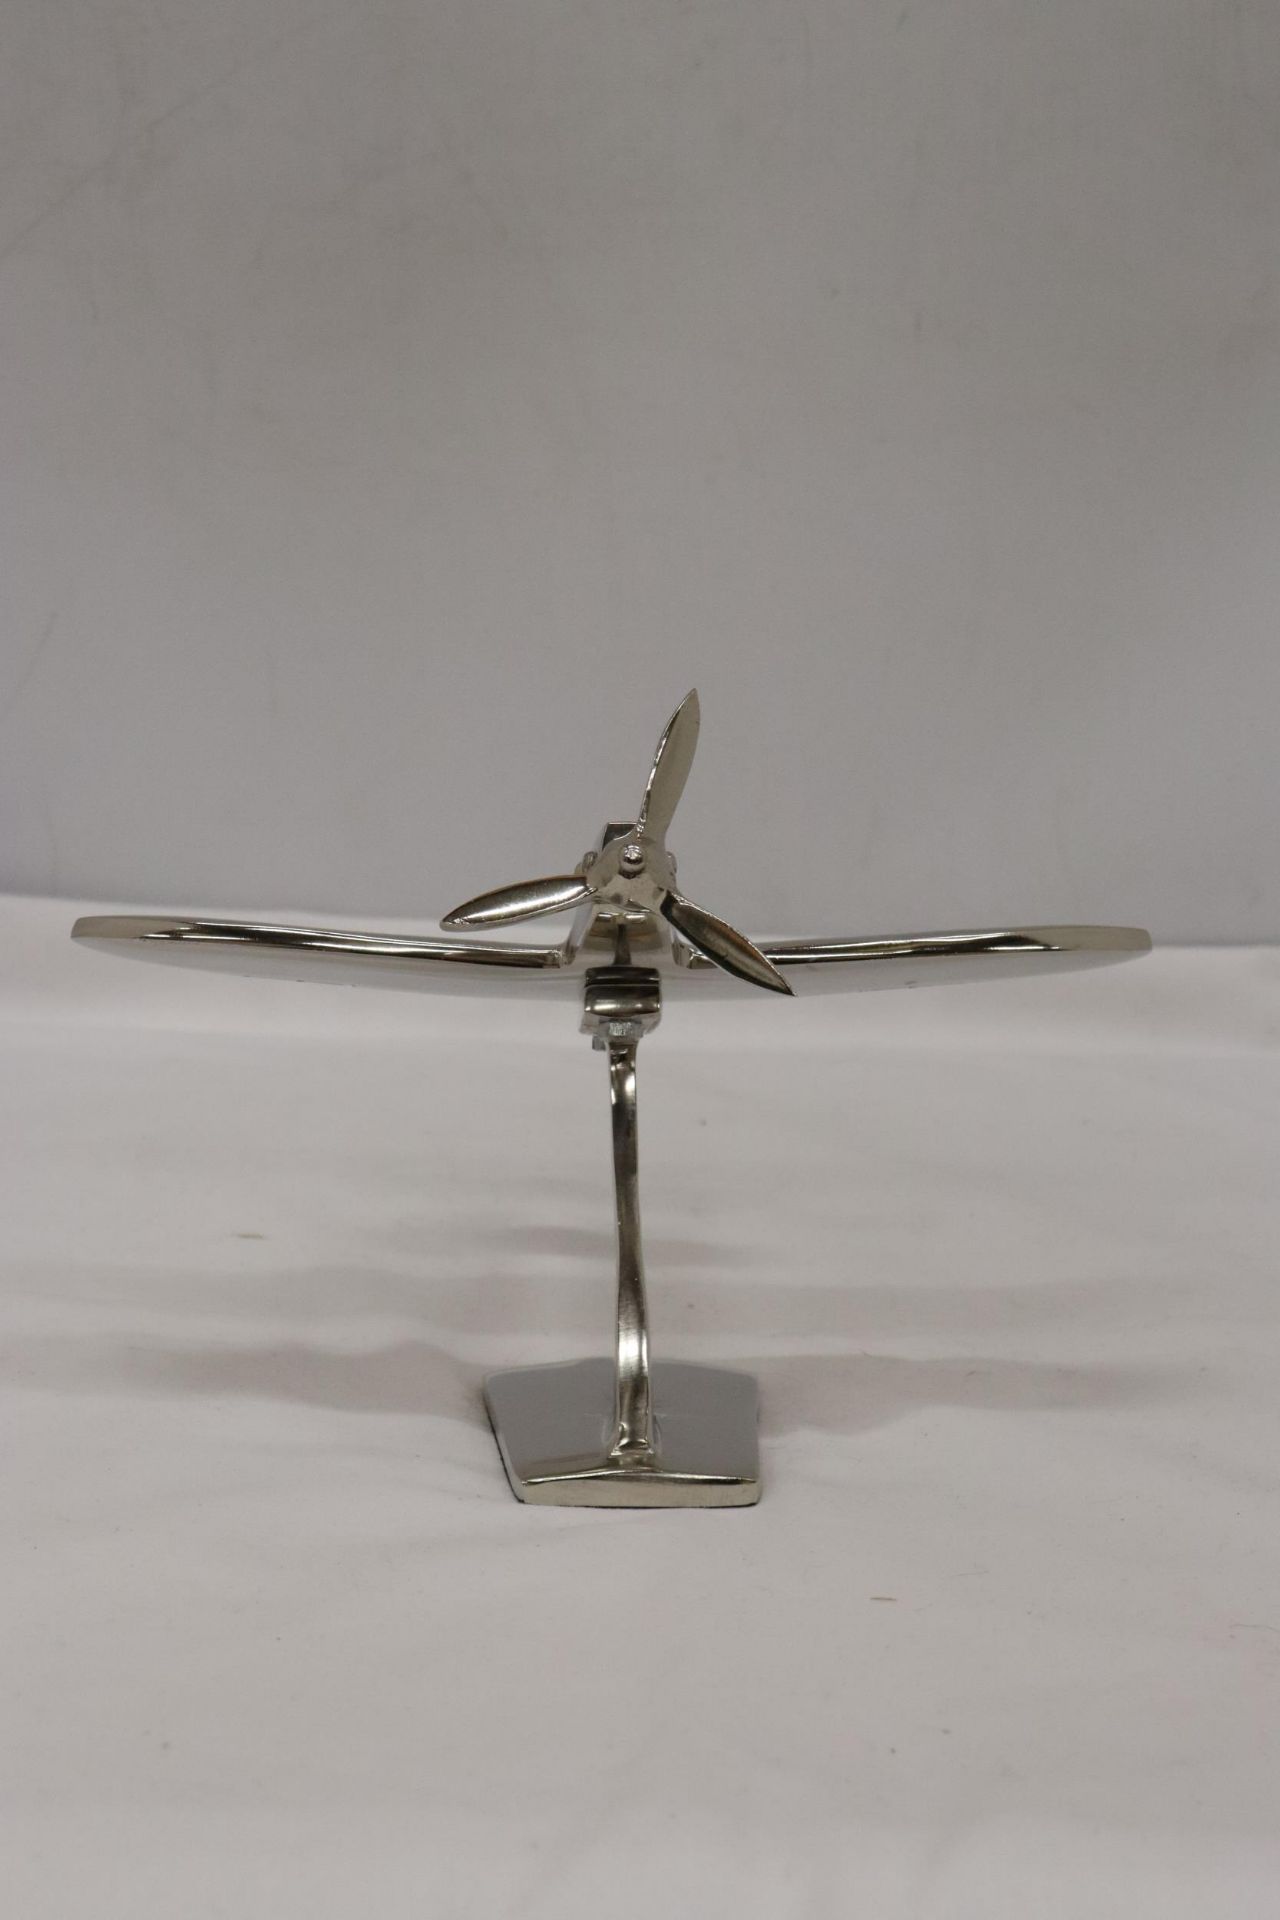 A CHROME SPITFIRE ON A STAND, HEIGHT 13CM - Image 2 of 5